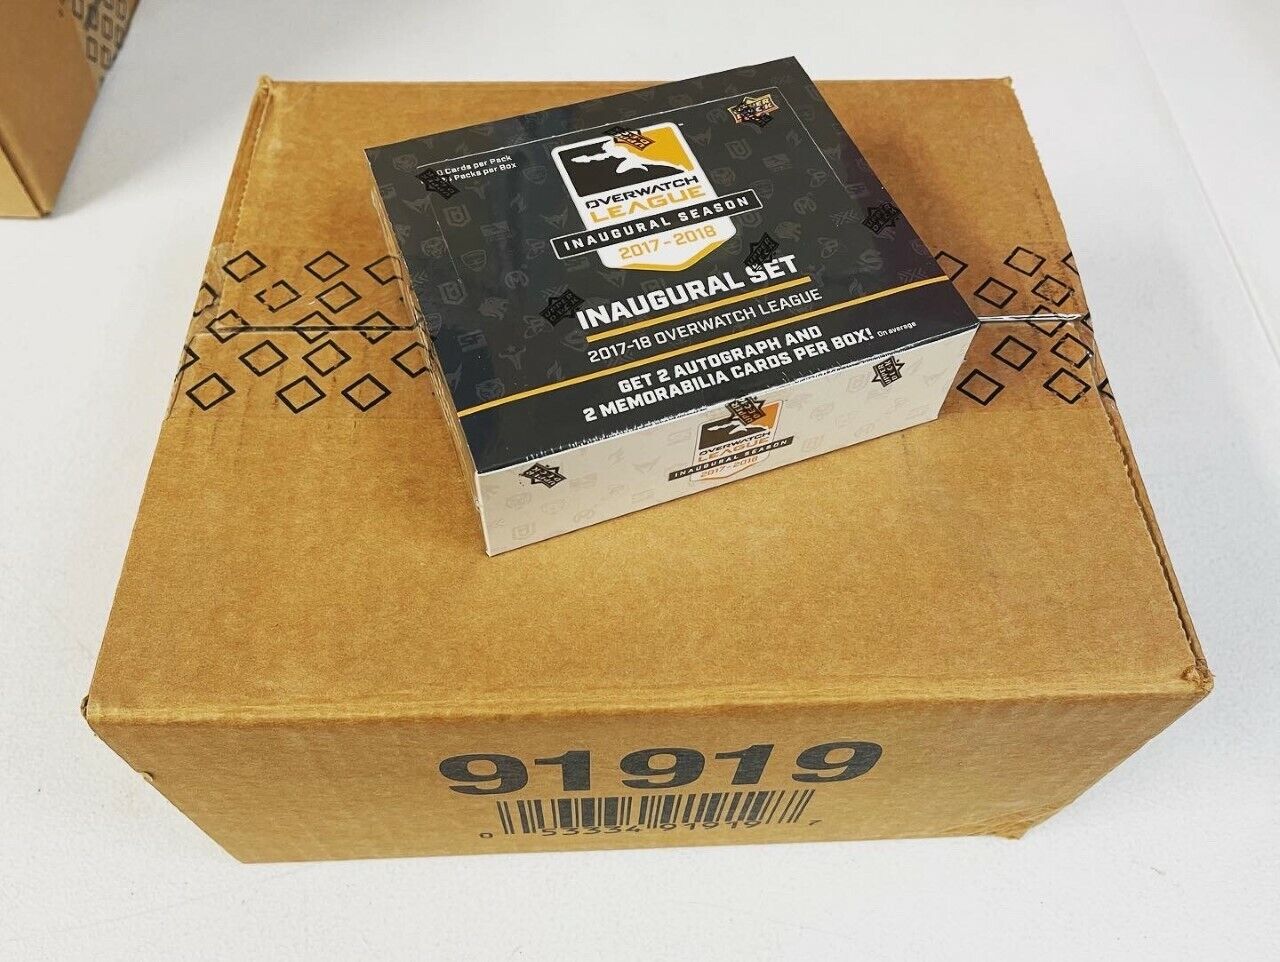 (Sealed) 2017-18 Upper Deck Inaugural Set Overwatch League Case - 12 Boxes